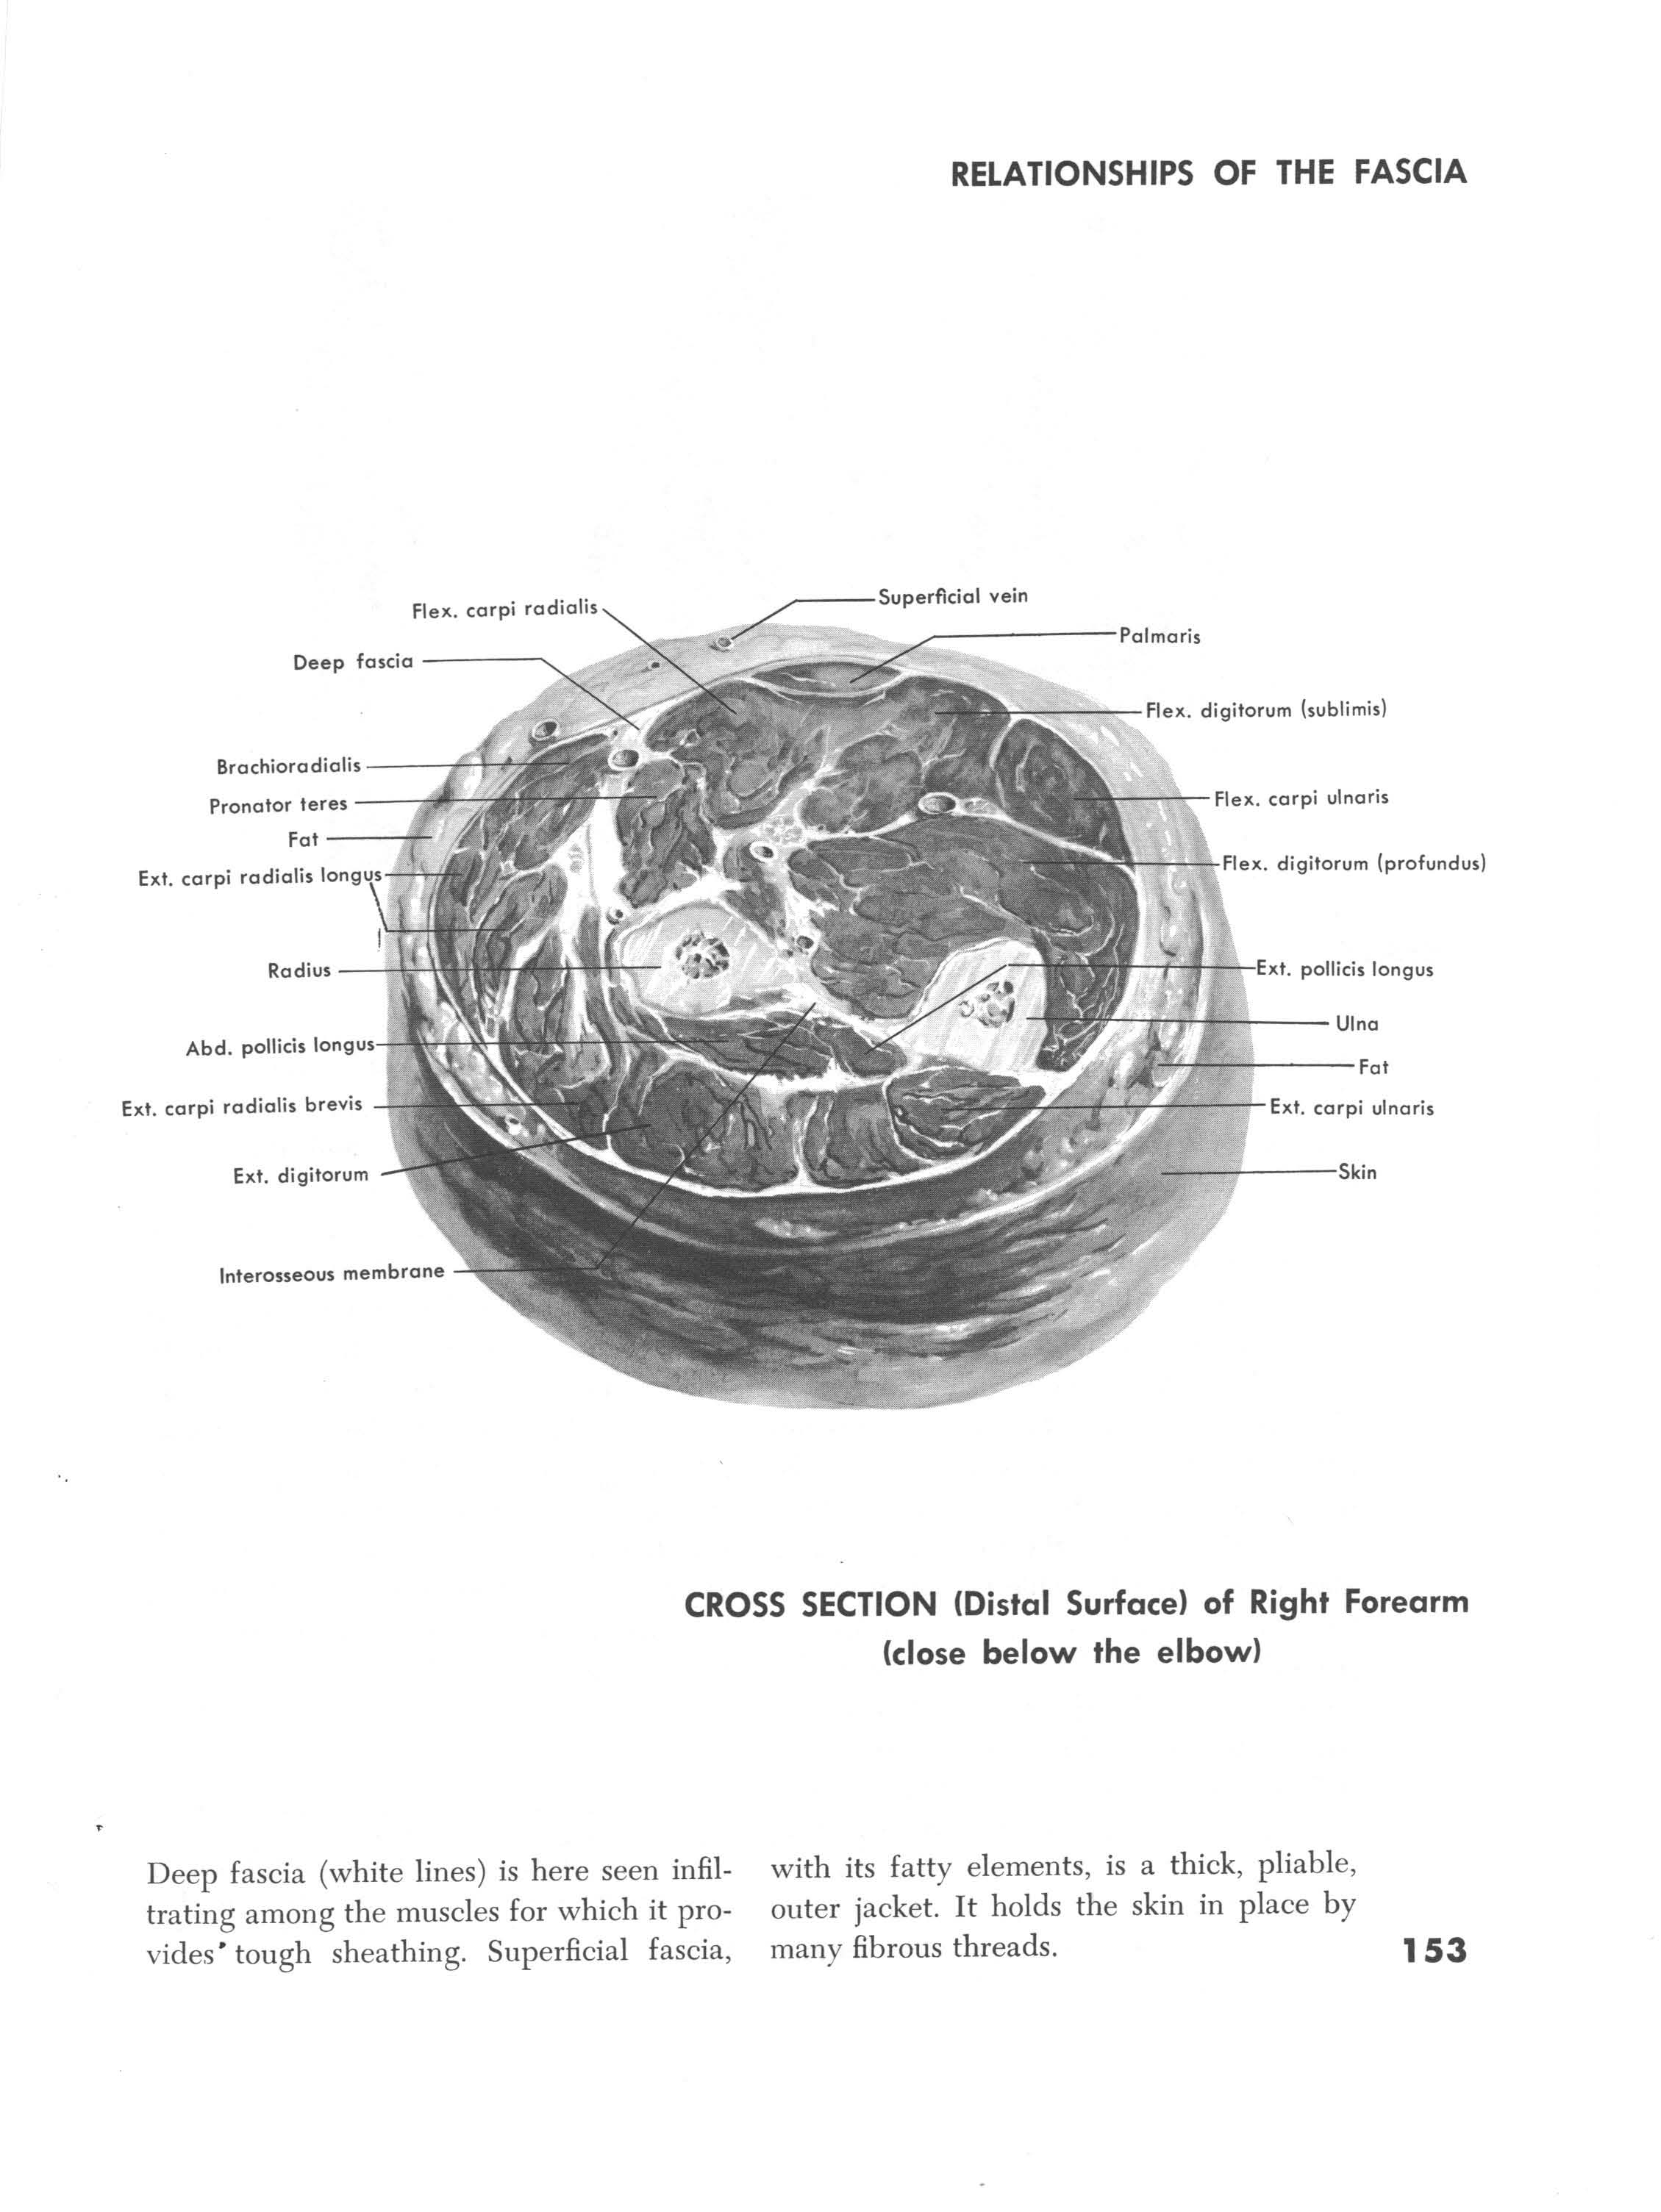 Cross section of the right forearm